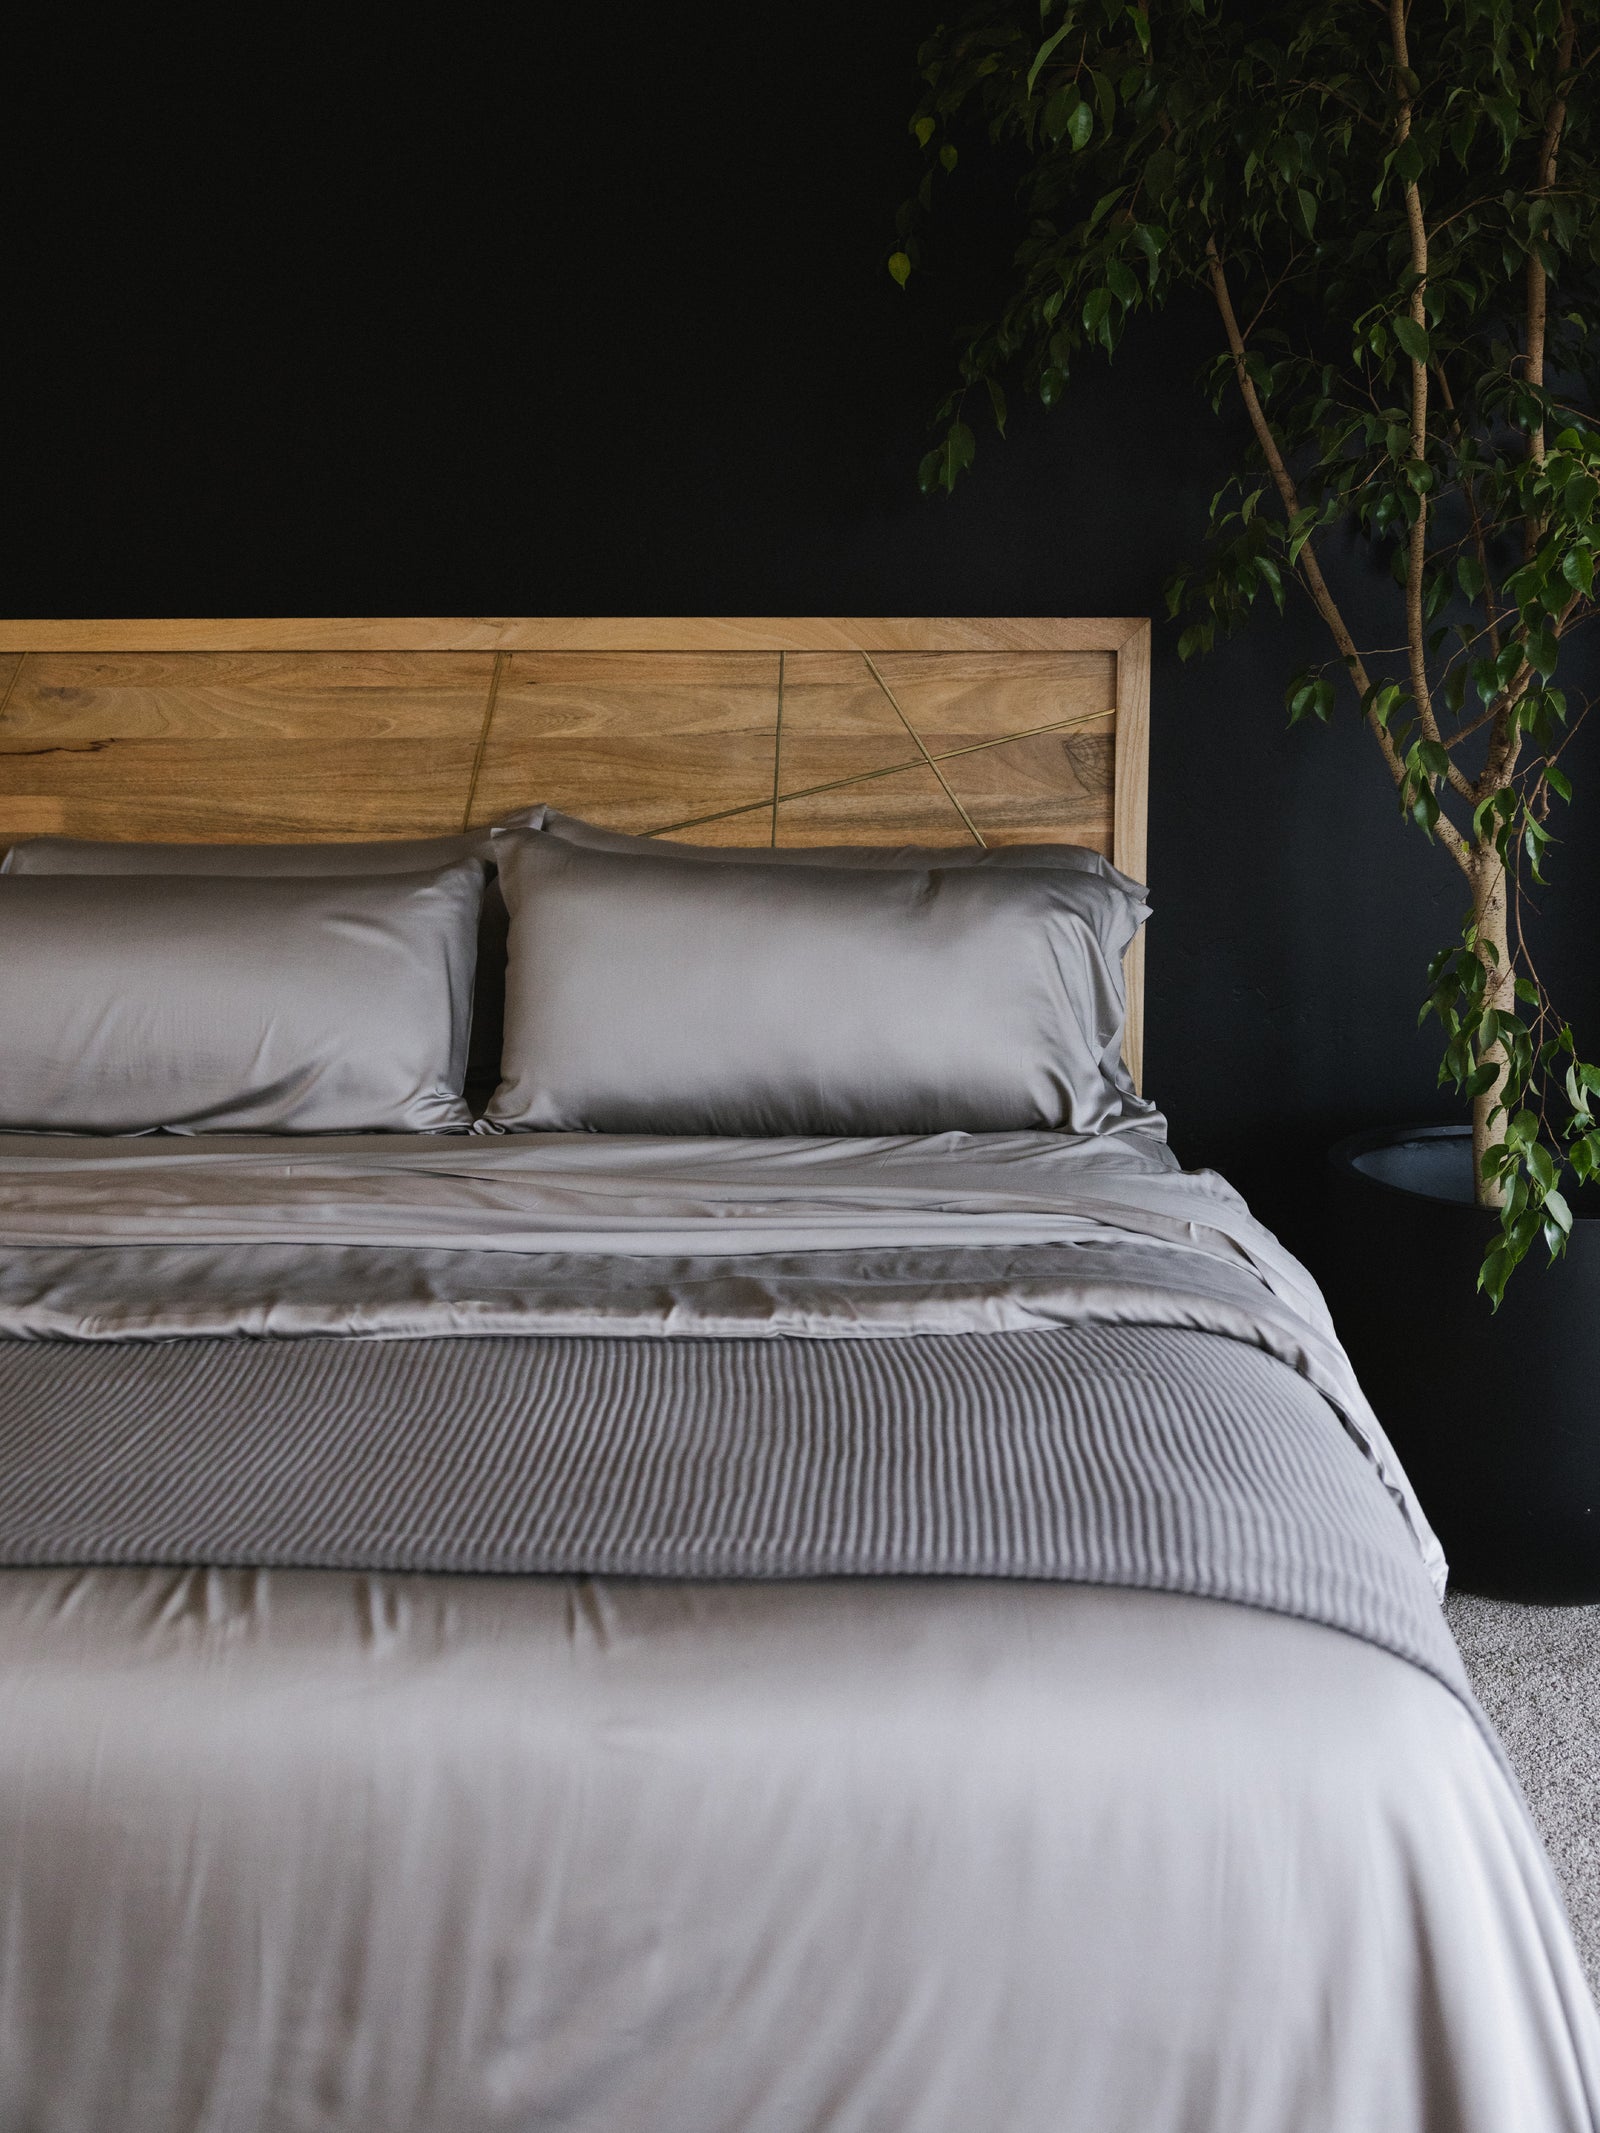 Bed made with dove grey sheets and a wooden headboard 